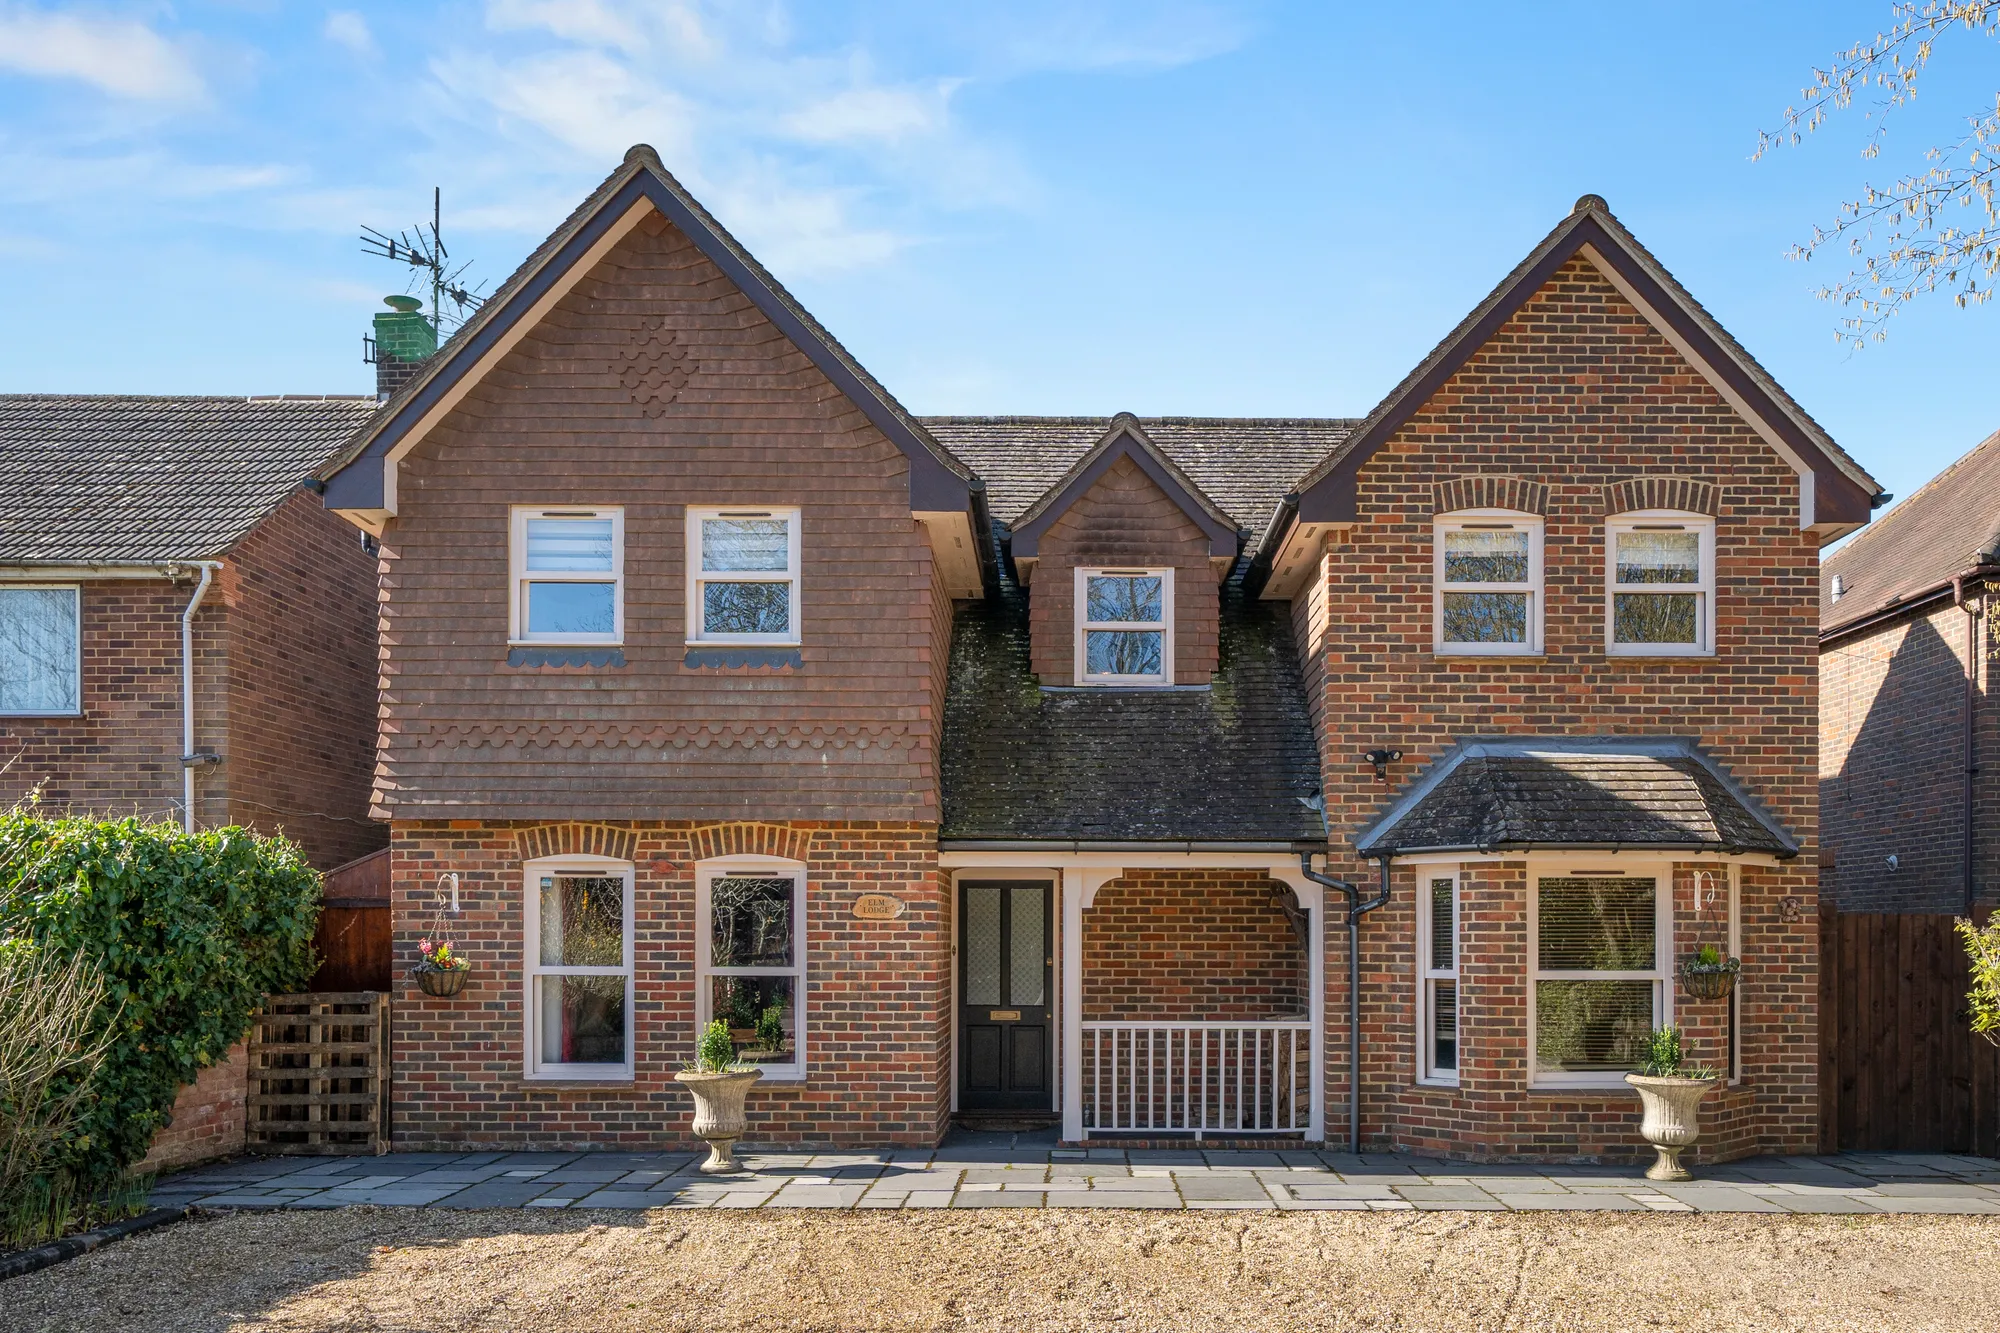 4 bed detached house for sale in Church Road, Windlesham - Property Image 1